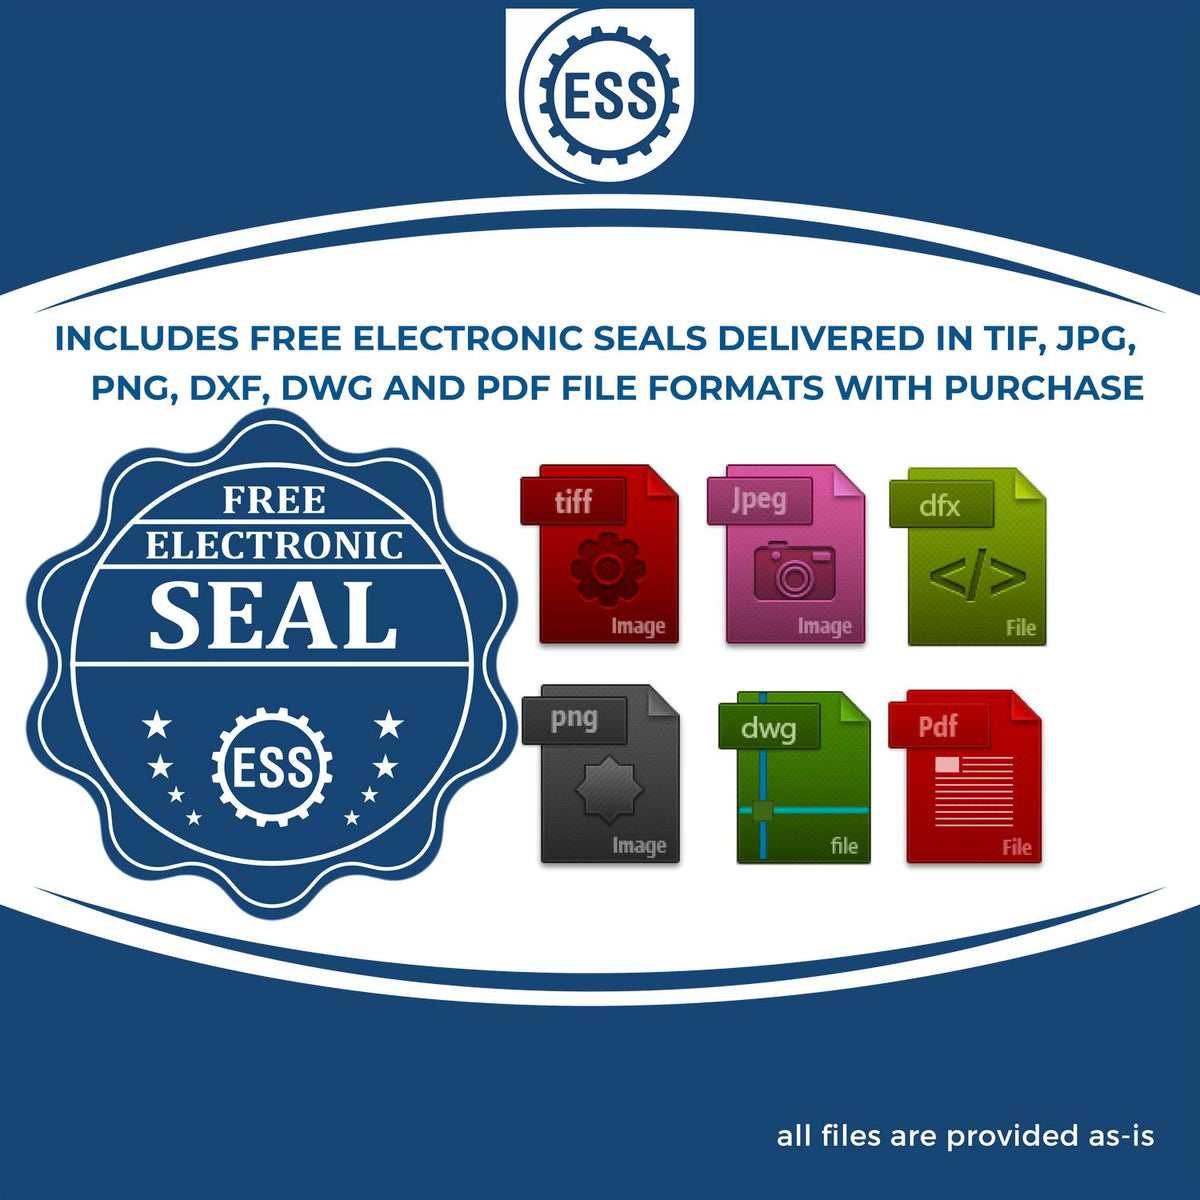 An infographic for the free electronic seal for the Gift Alabama Landscape Architect Seal illustrating the different file type icons such as DXF, DWG, TIF, JPG and PNG.